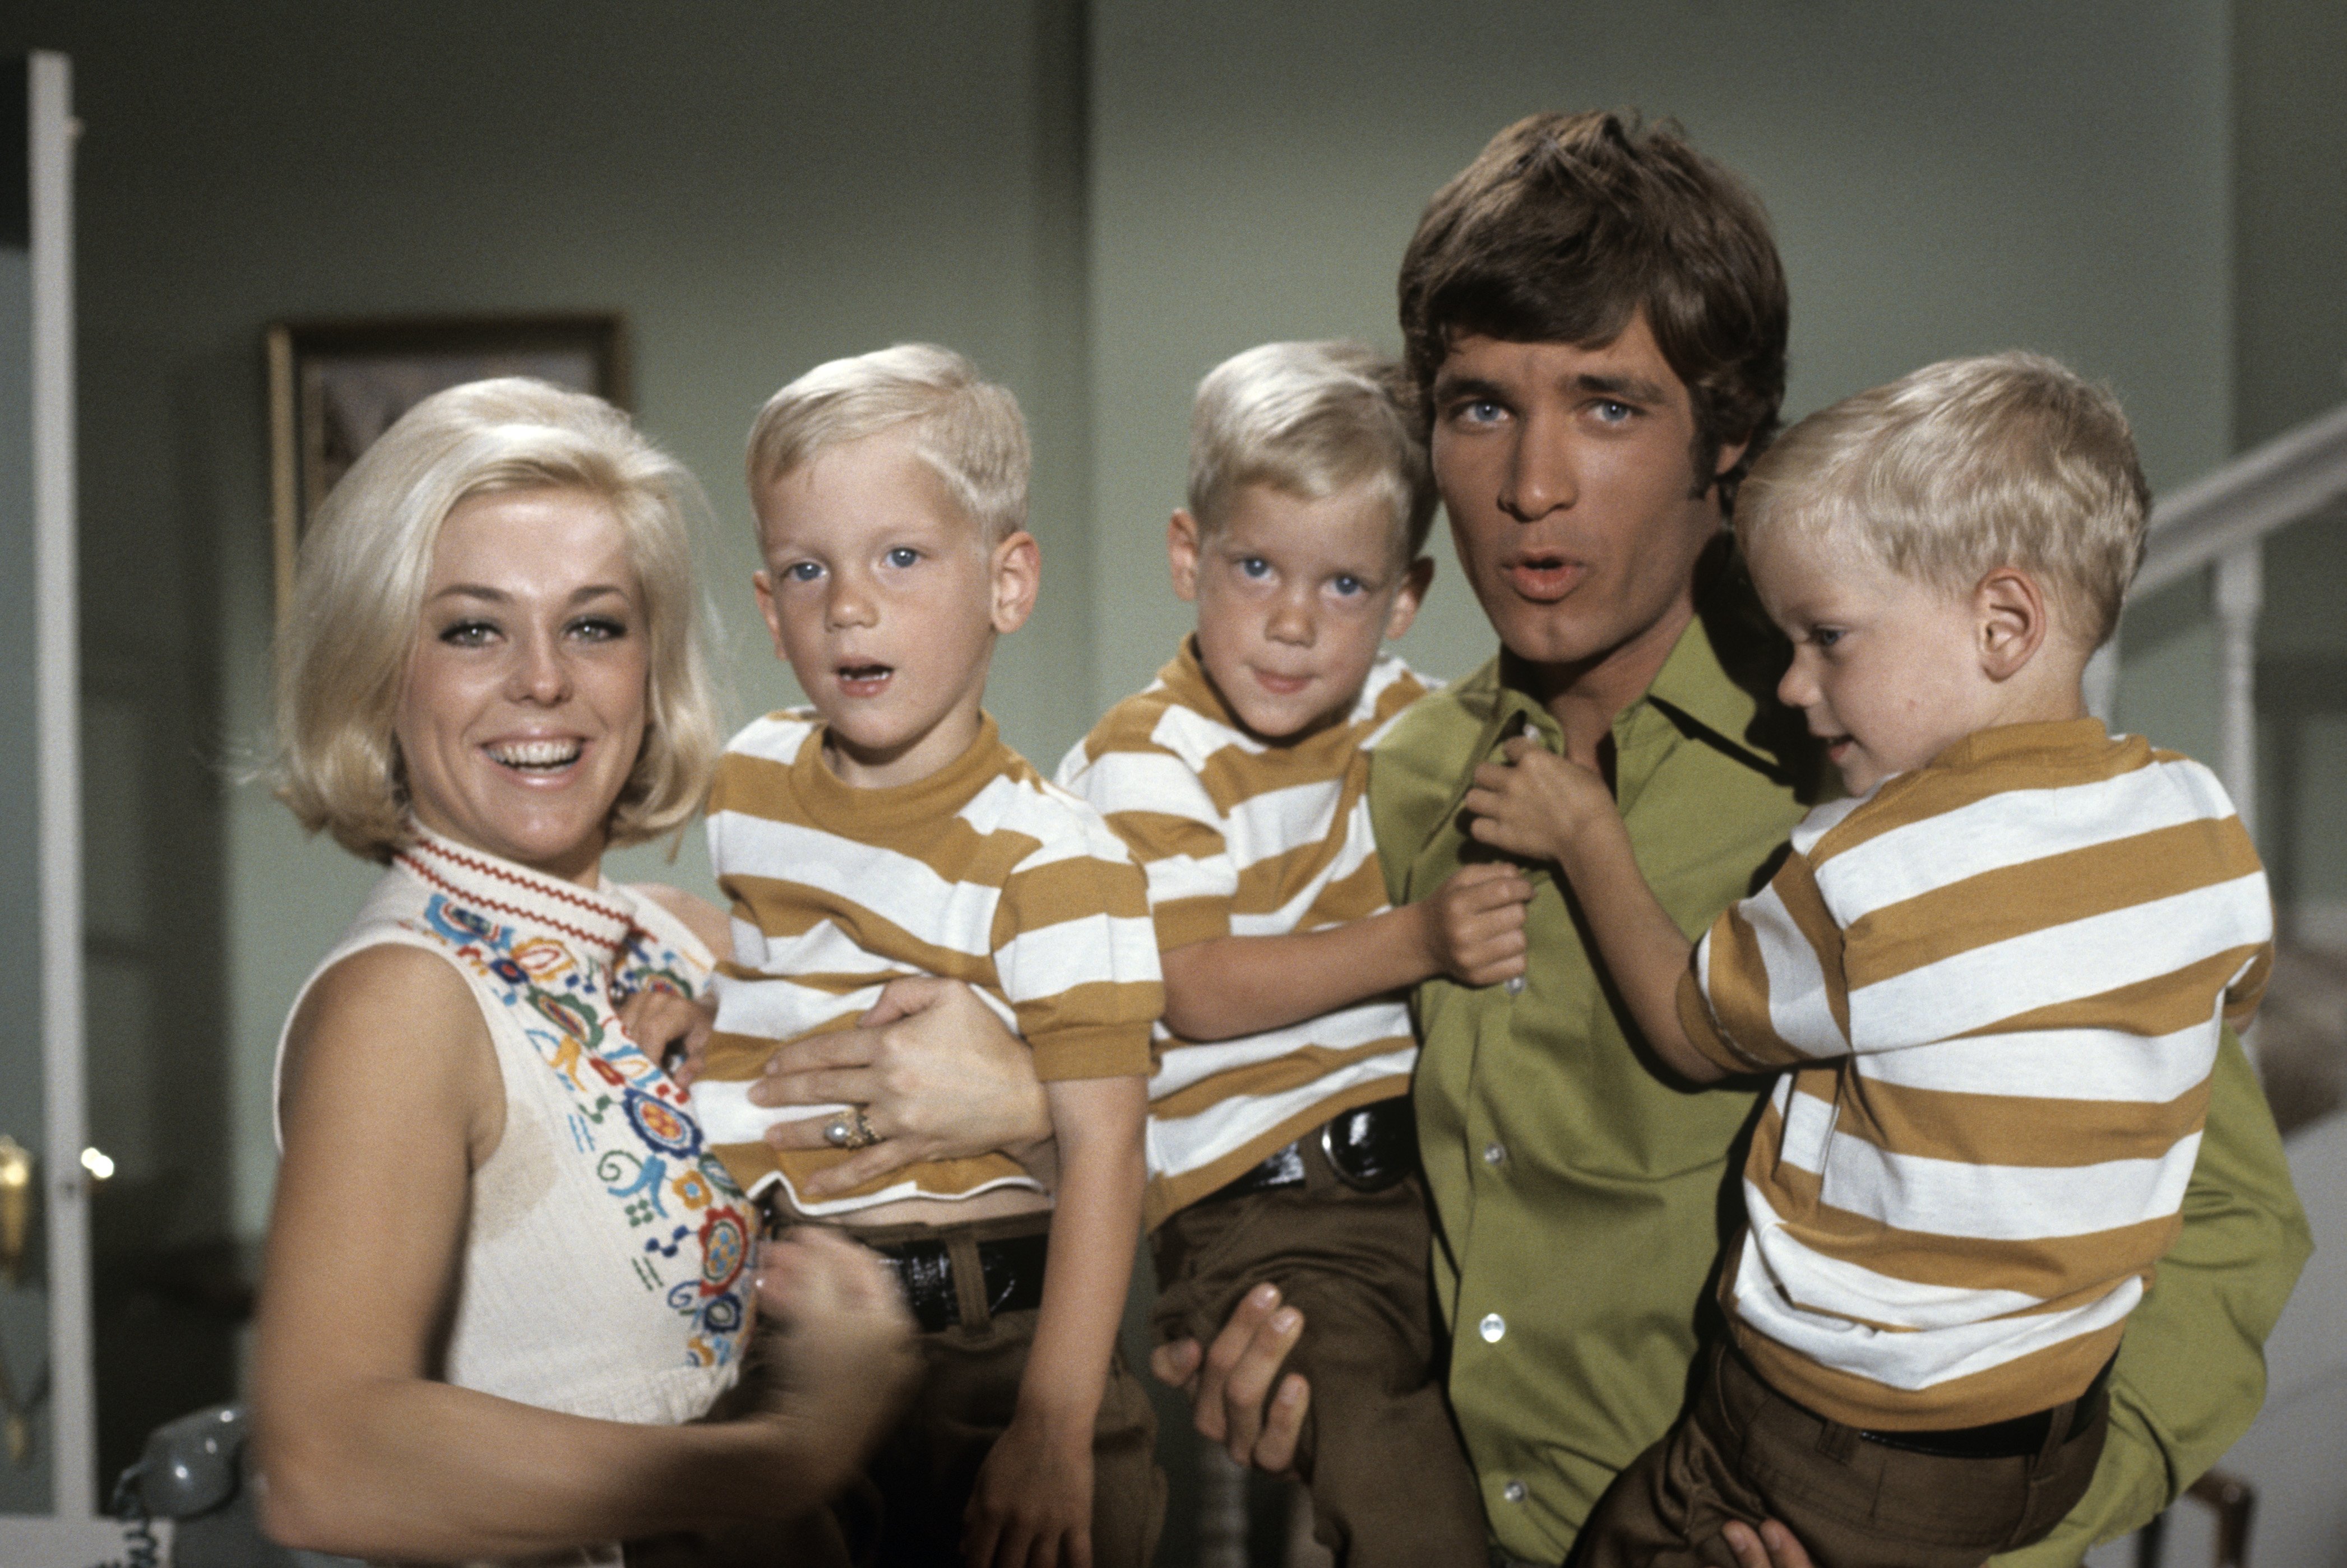 Tina Cole, Extras, Don Grady in "My Three Sons" circa 1960-1972 | Source: Getty Images